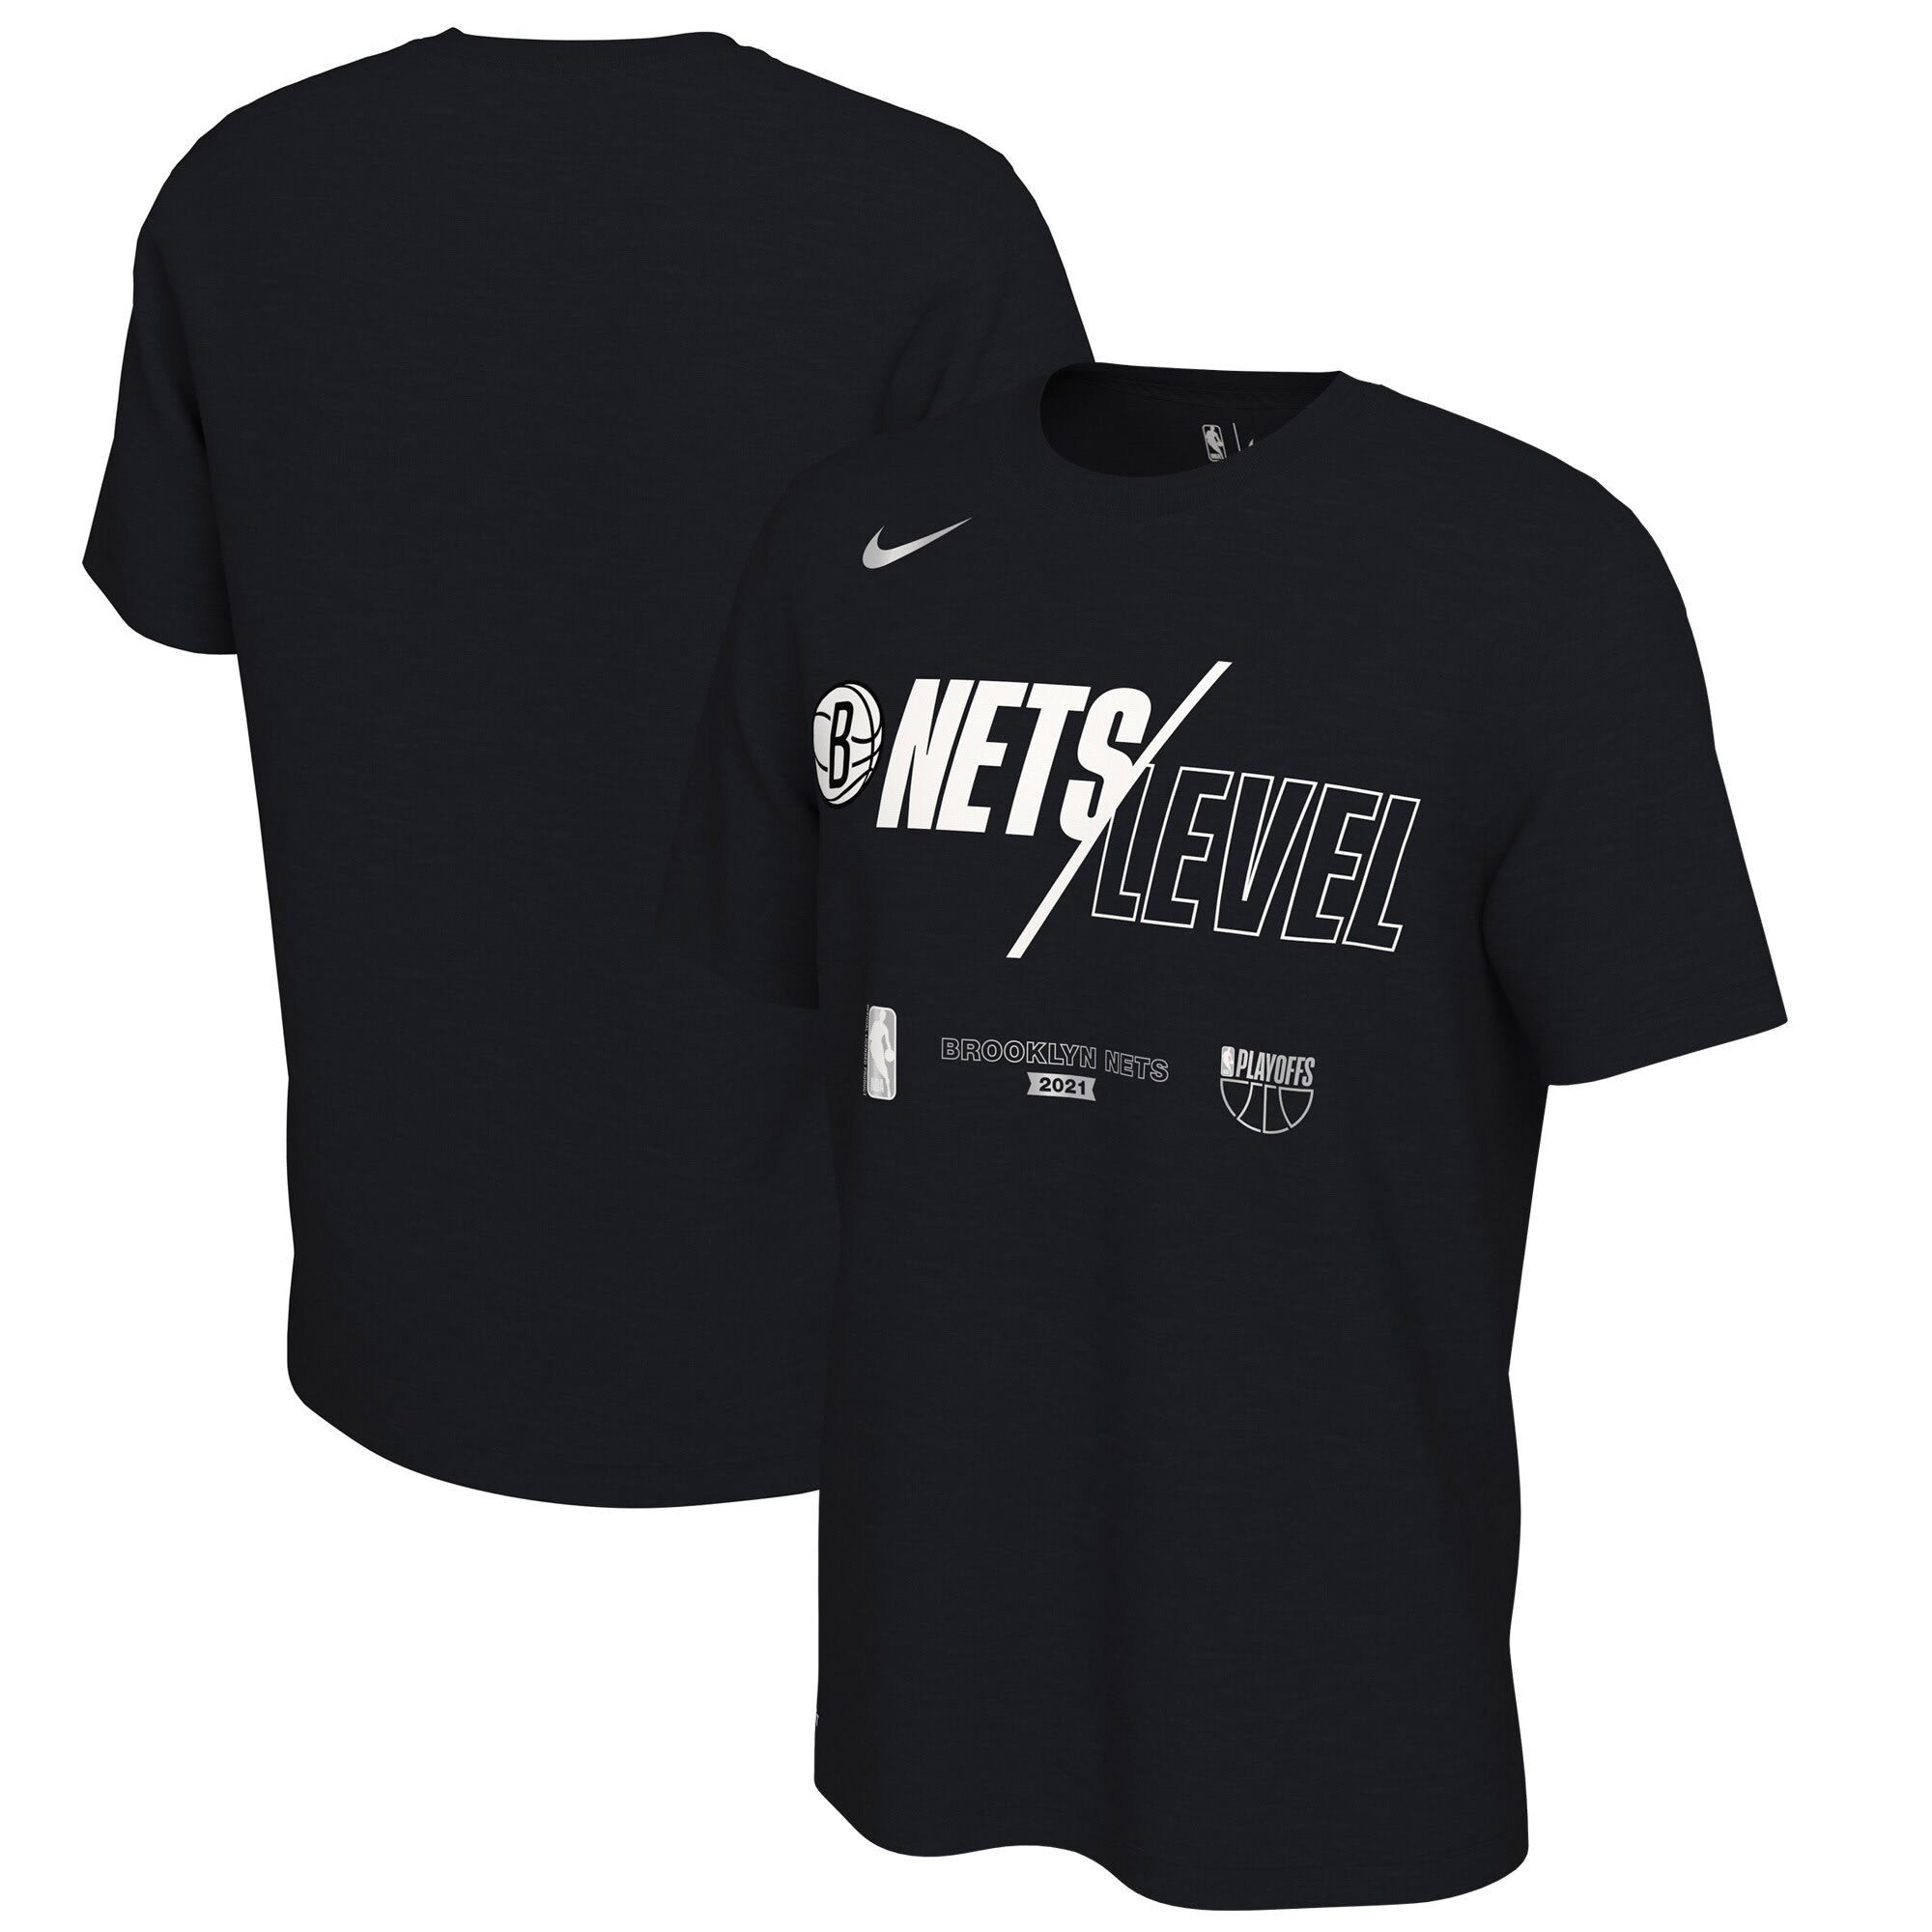 Get ready for the NBA Playoffs with new Brooklyn Nets gear